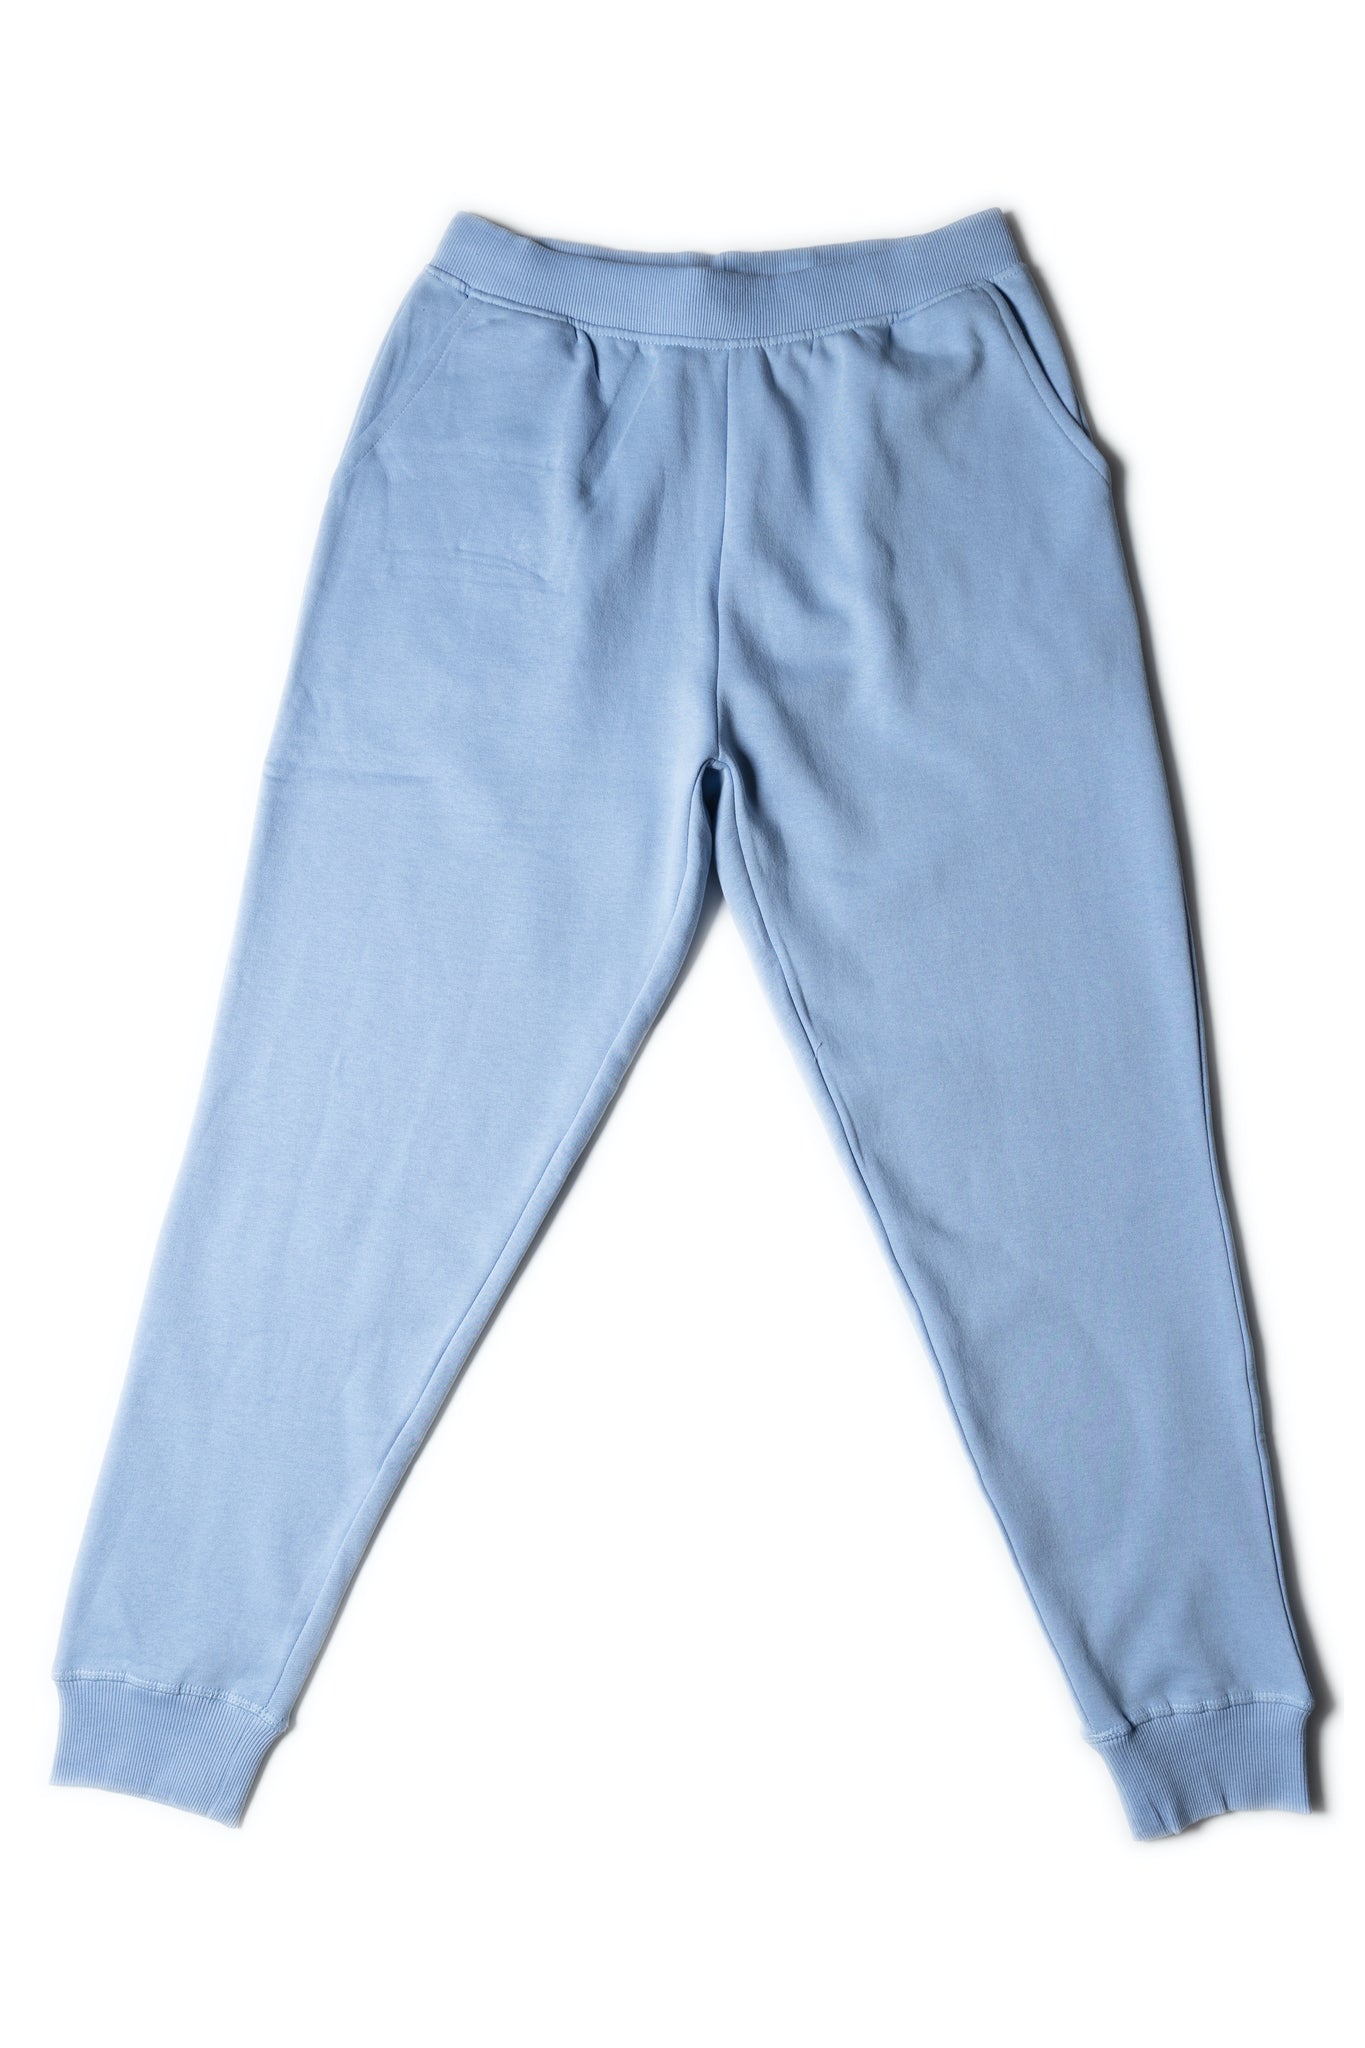 HERO-5020R Youth Joggers - Sky Blue (Relaxed Fit)